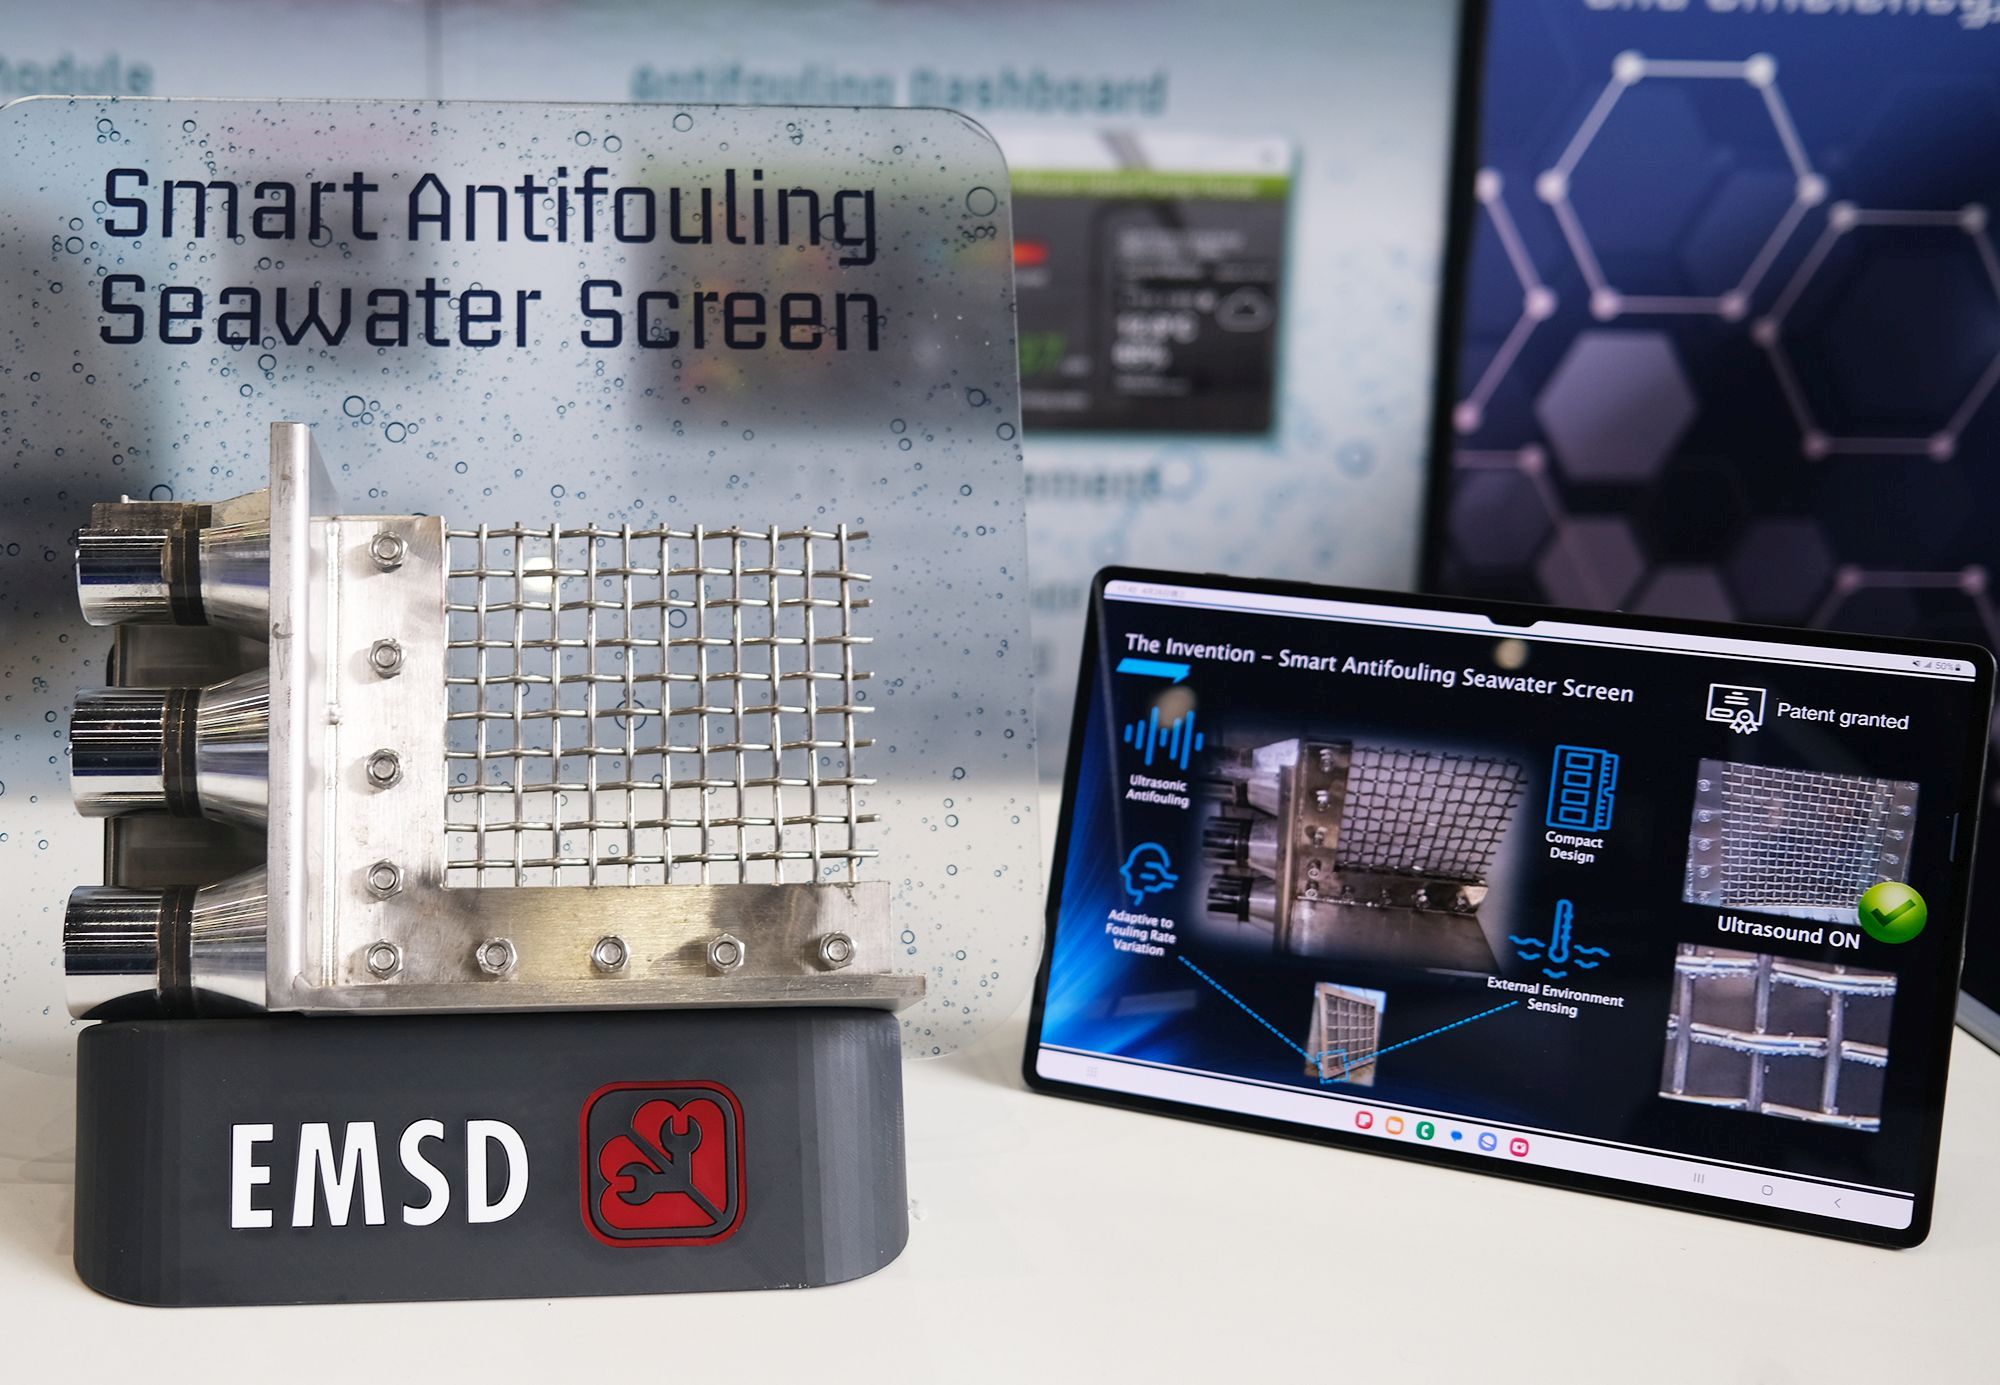 The Smart Antifouling Seawater Screen uses ultrasound to prevent the forming of biofilm, so as to enhance the efficiency of the seawater cooling system.